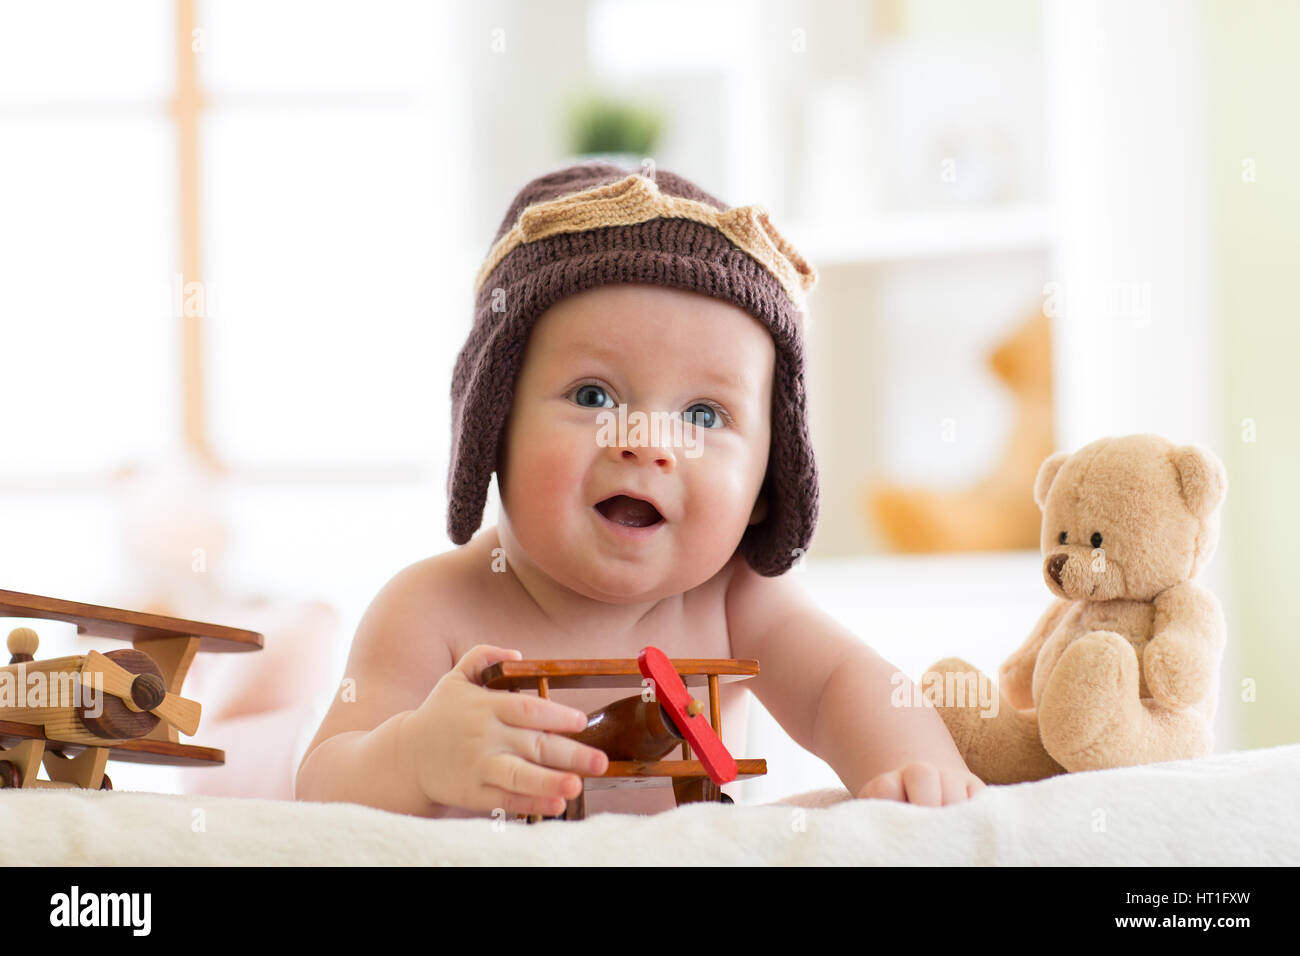 Little baby boy weared pilot hat with airplane and teddy bear toys Stock Photo